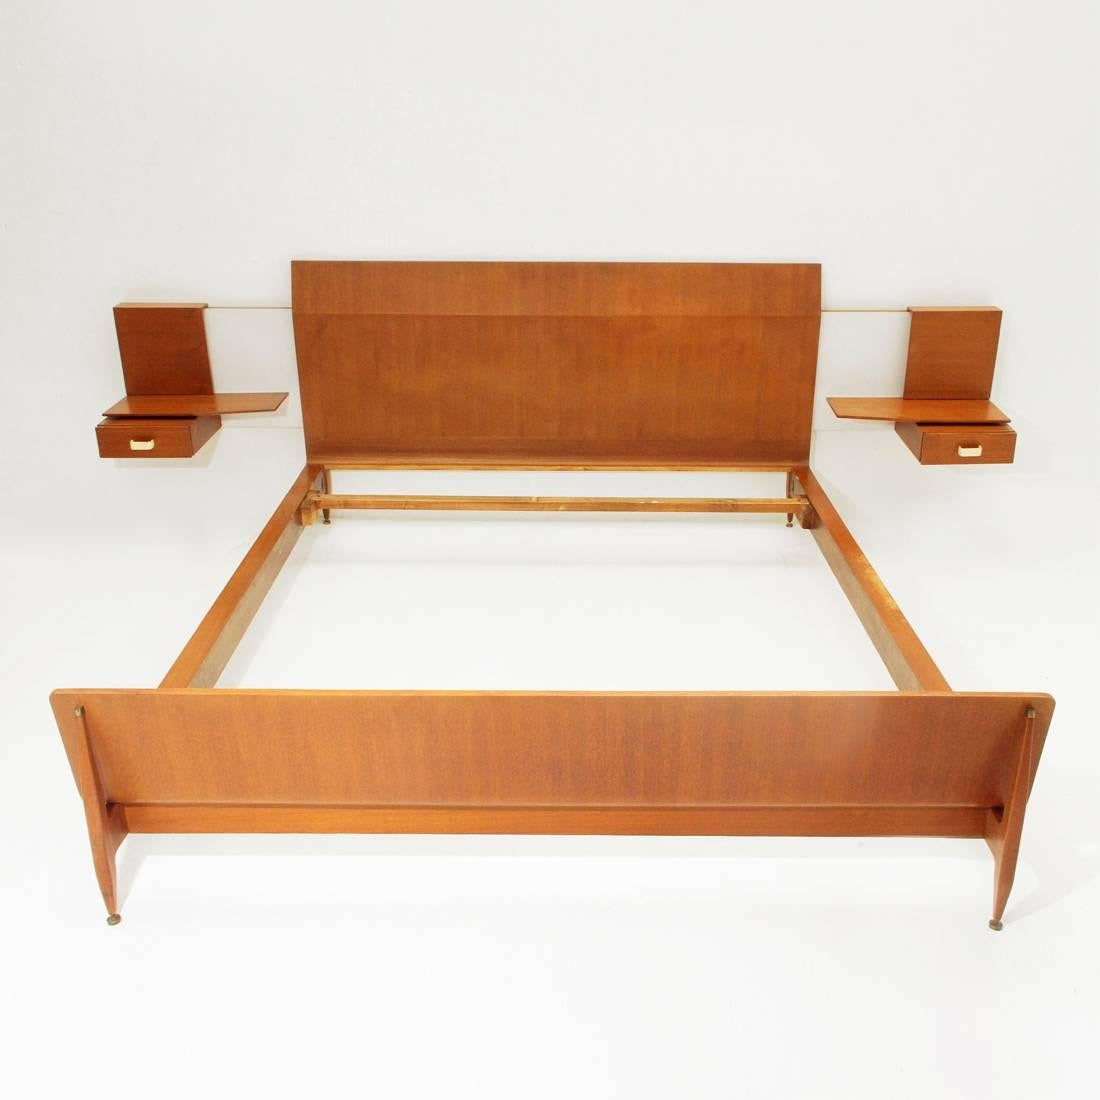 Bed produced in the 1950s by Galleria Mobili d'Arte from Cantù,
company that also produced various Gio Ponti furniture.
Teak veneered wood structure.
Strong tapered legs and adjustable height feet in brass
Headboard and bedside tables connected